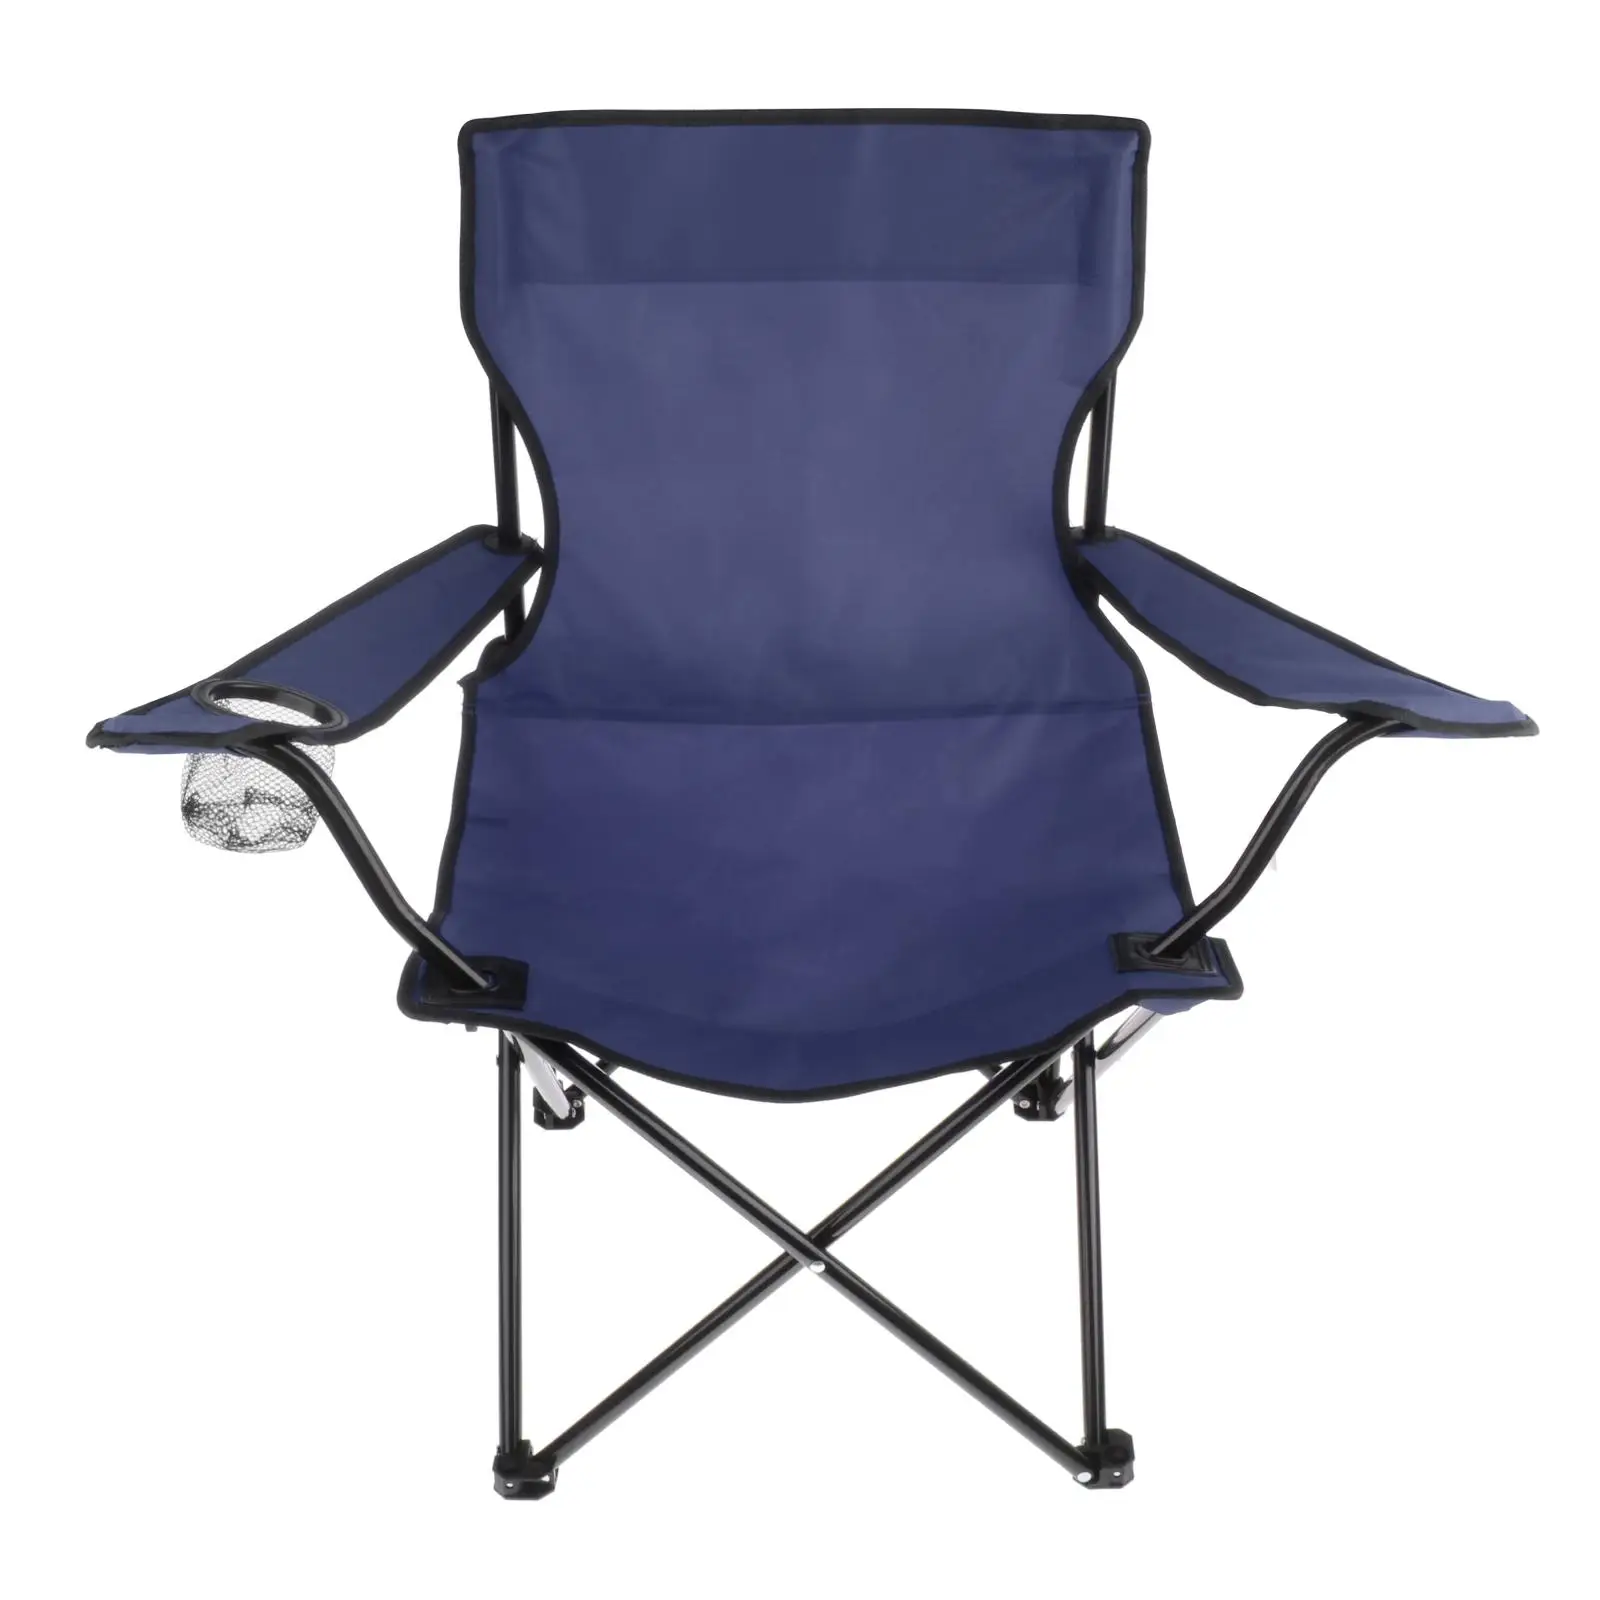 Folding Camping Chairs Folding Chairs with Cup Holder Arm Rest Outdoor Fishing Beach Garden Travel Heavy Duty Seat